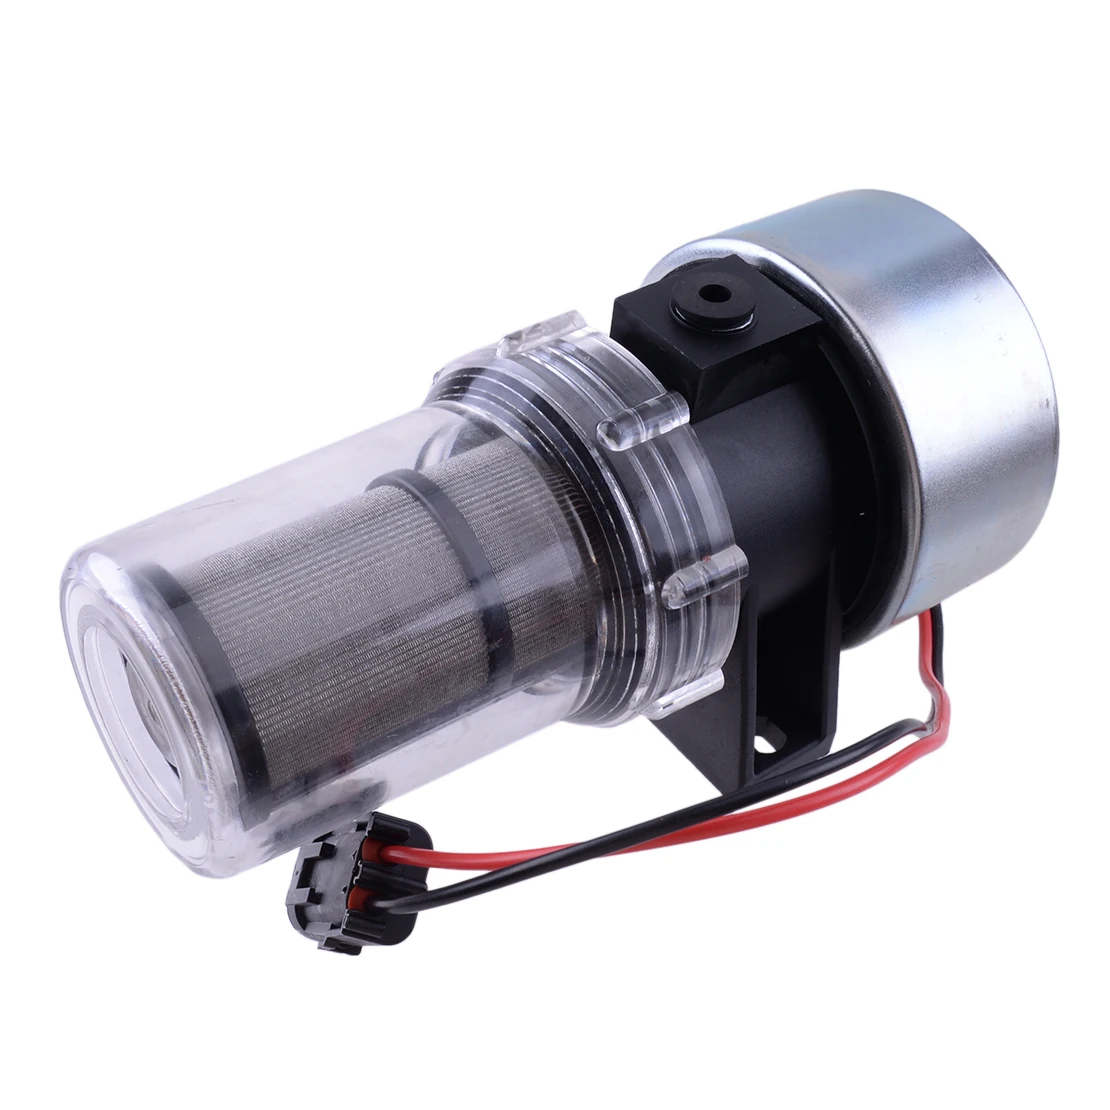 

30-01108-03 Diesel Fuel Pump 41-7059 12V Fit for Thermo King Carrier MD KD RD TS URD XDS TD LND AM2 AMDM2 CDMAX SuperNWD5100